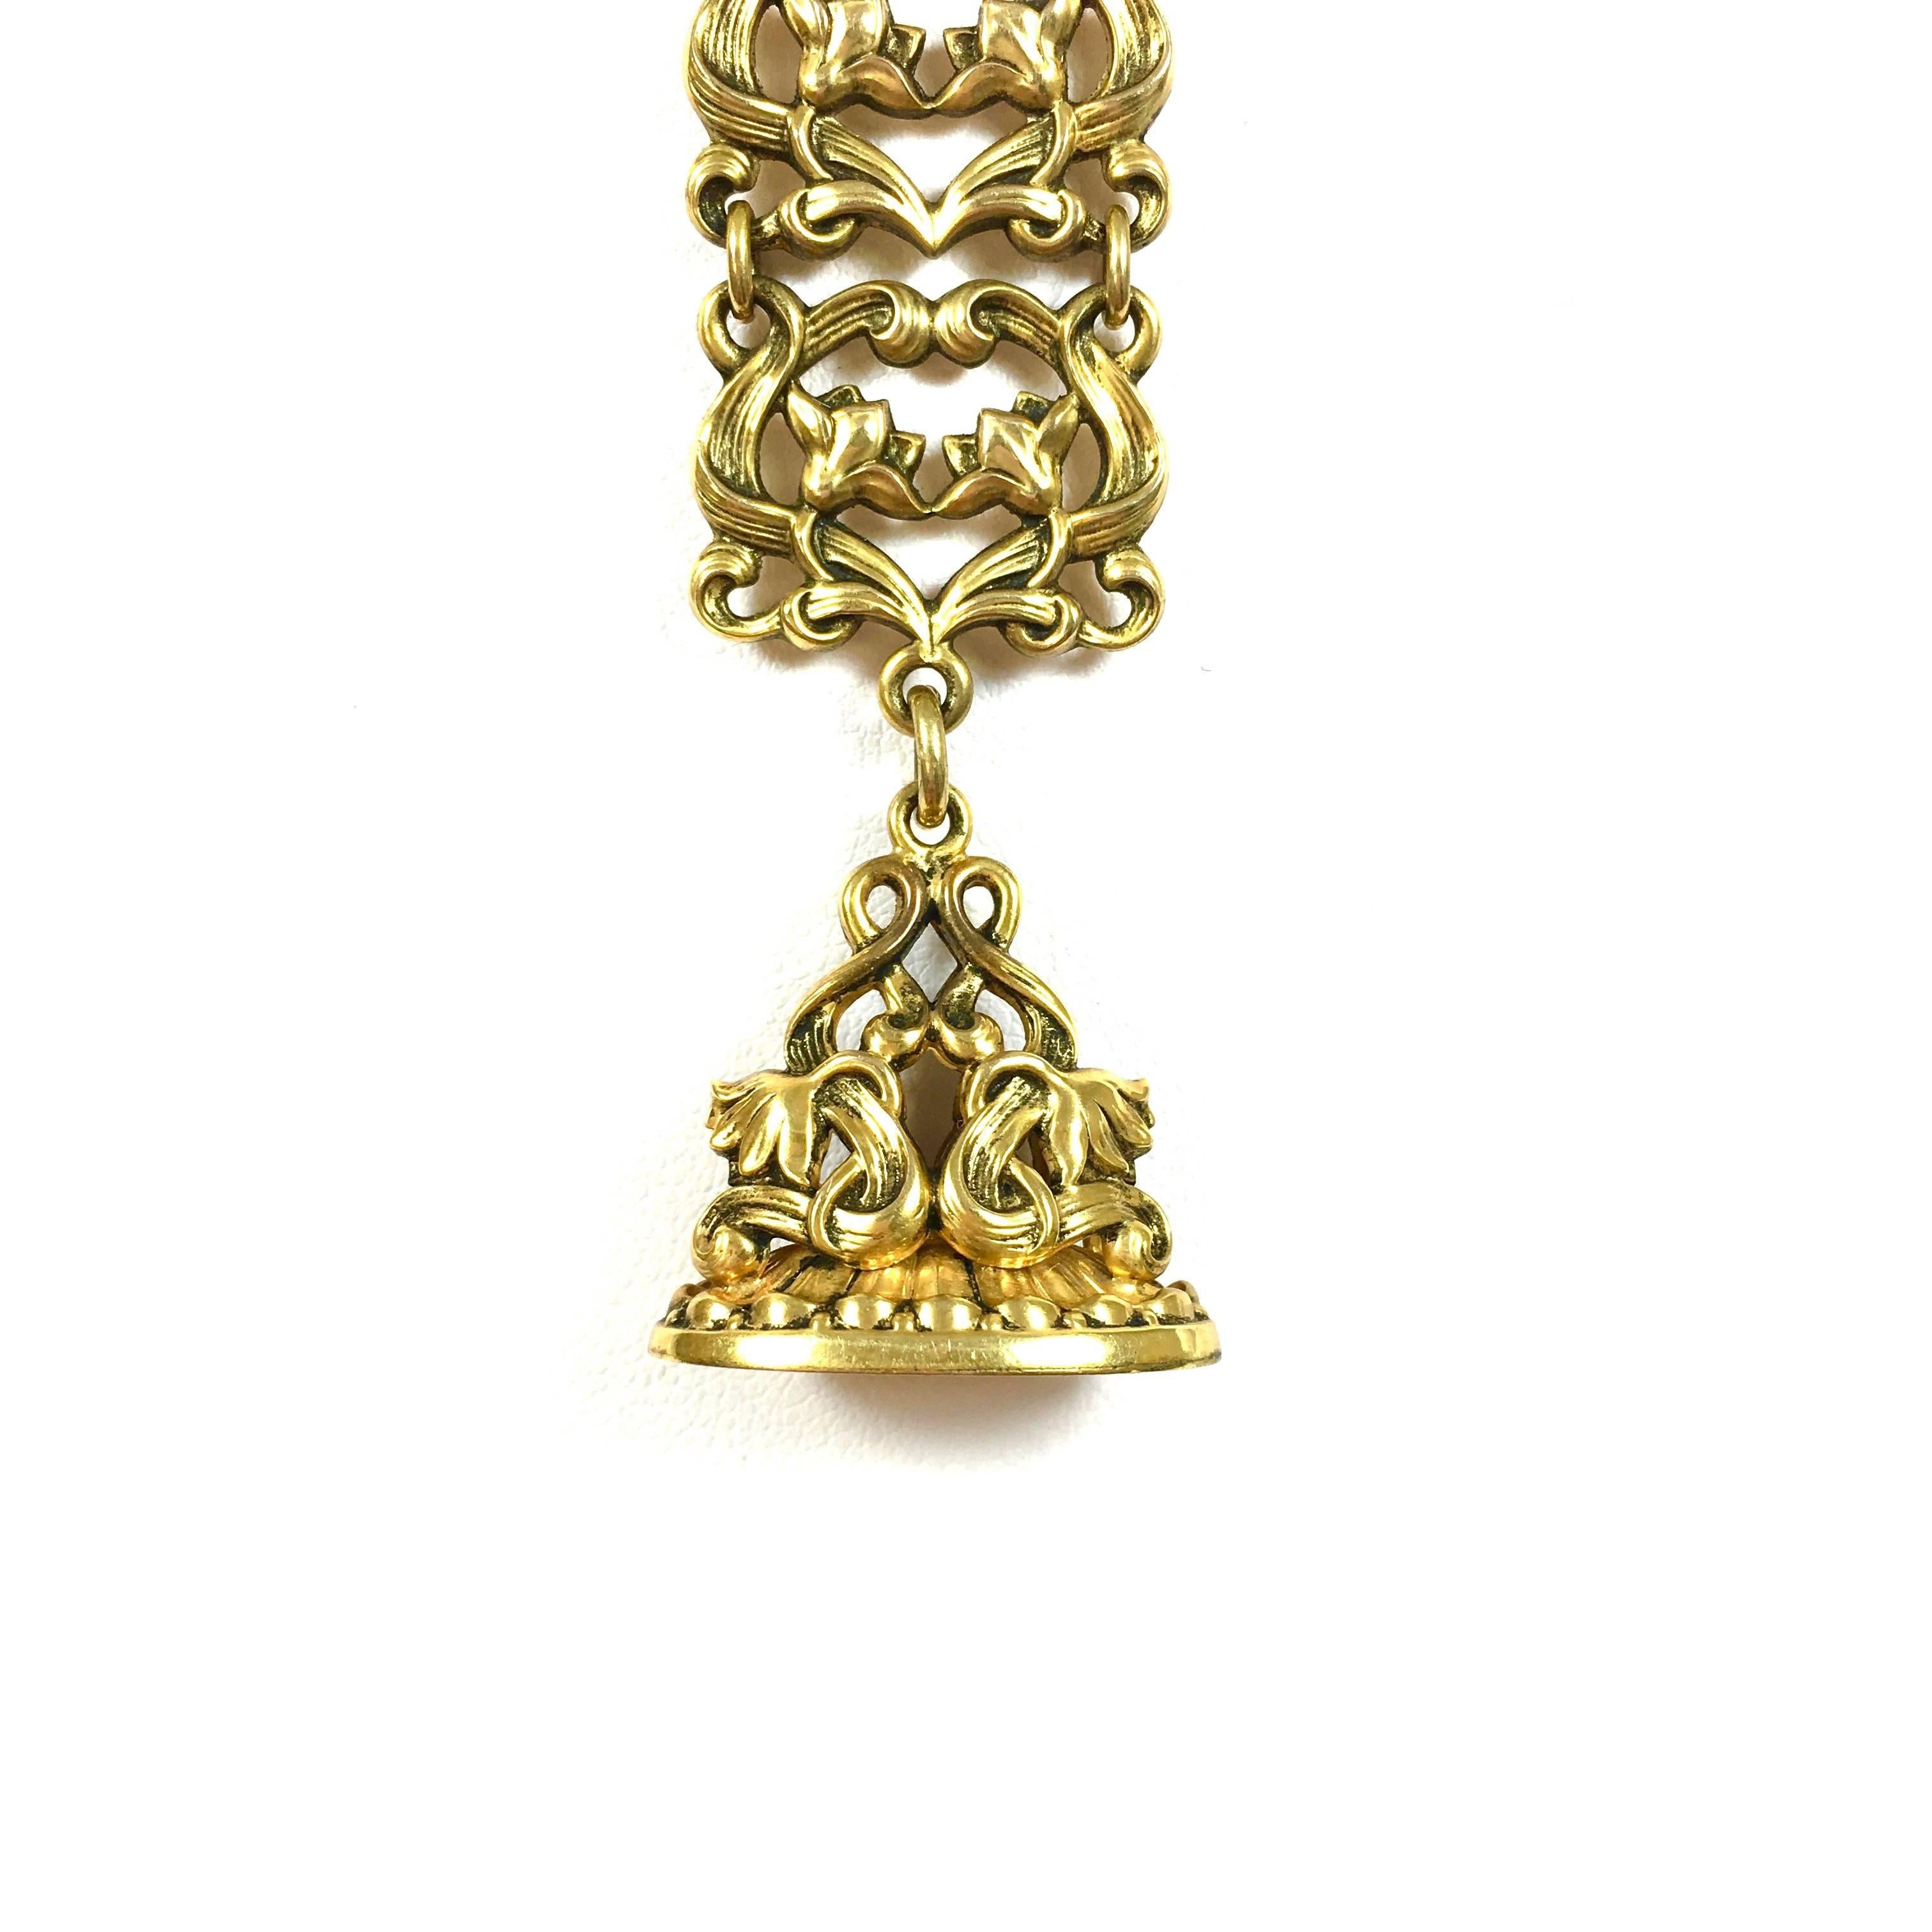 Amazing Victorian piece crafted in 10K yellow gold, featuring an open work scroll design wax seal stamp supported by an 18 mm wide gold ribbon and a brooch with black enamel and gold tassel. 
Length: approximately 5 inches
Weight: 15.8 grams